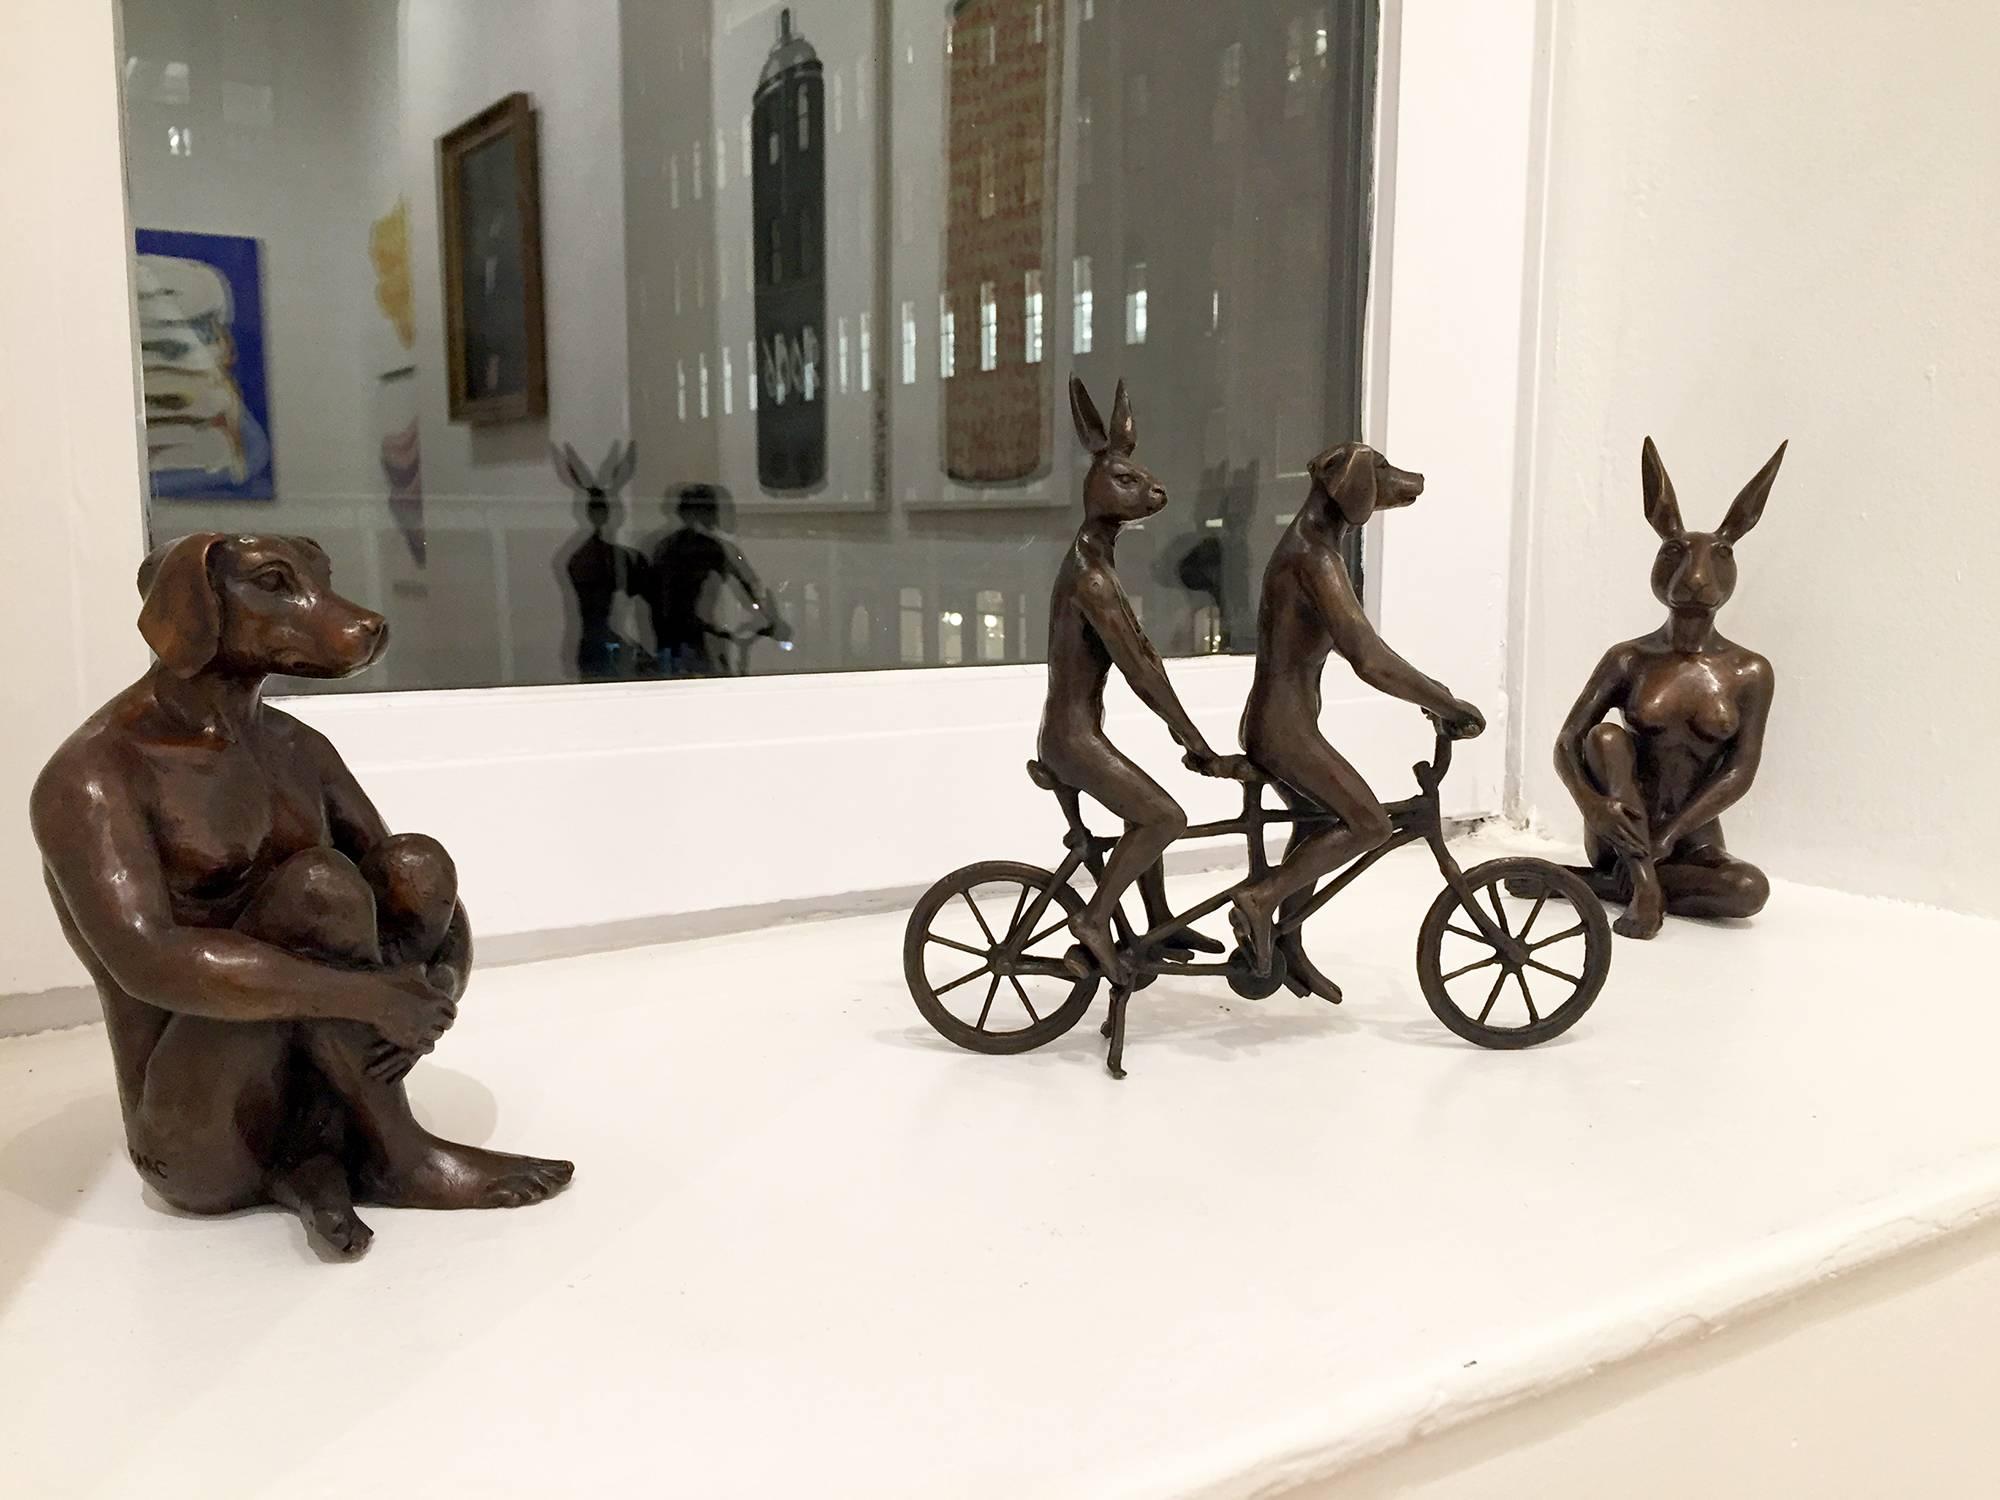 They Loved Riding Together in Paris - Sculpture by Gillie and Marc Schattner